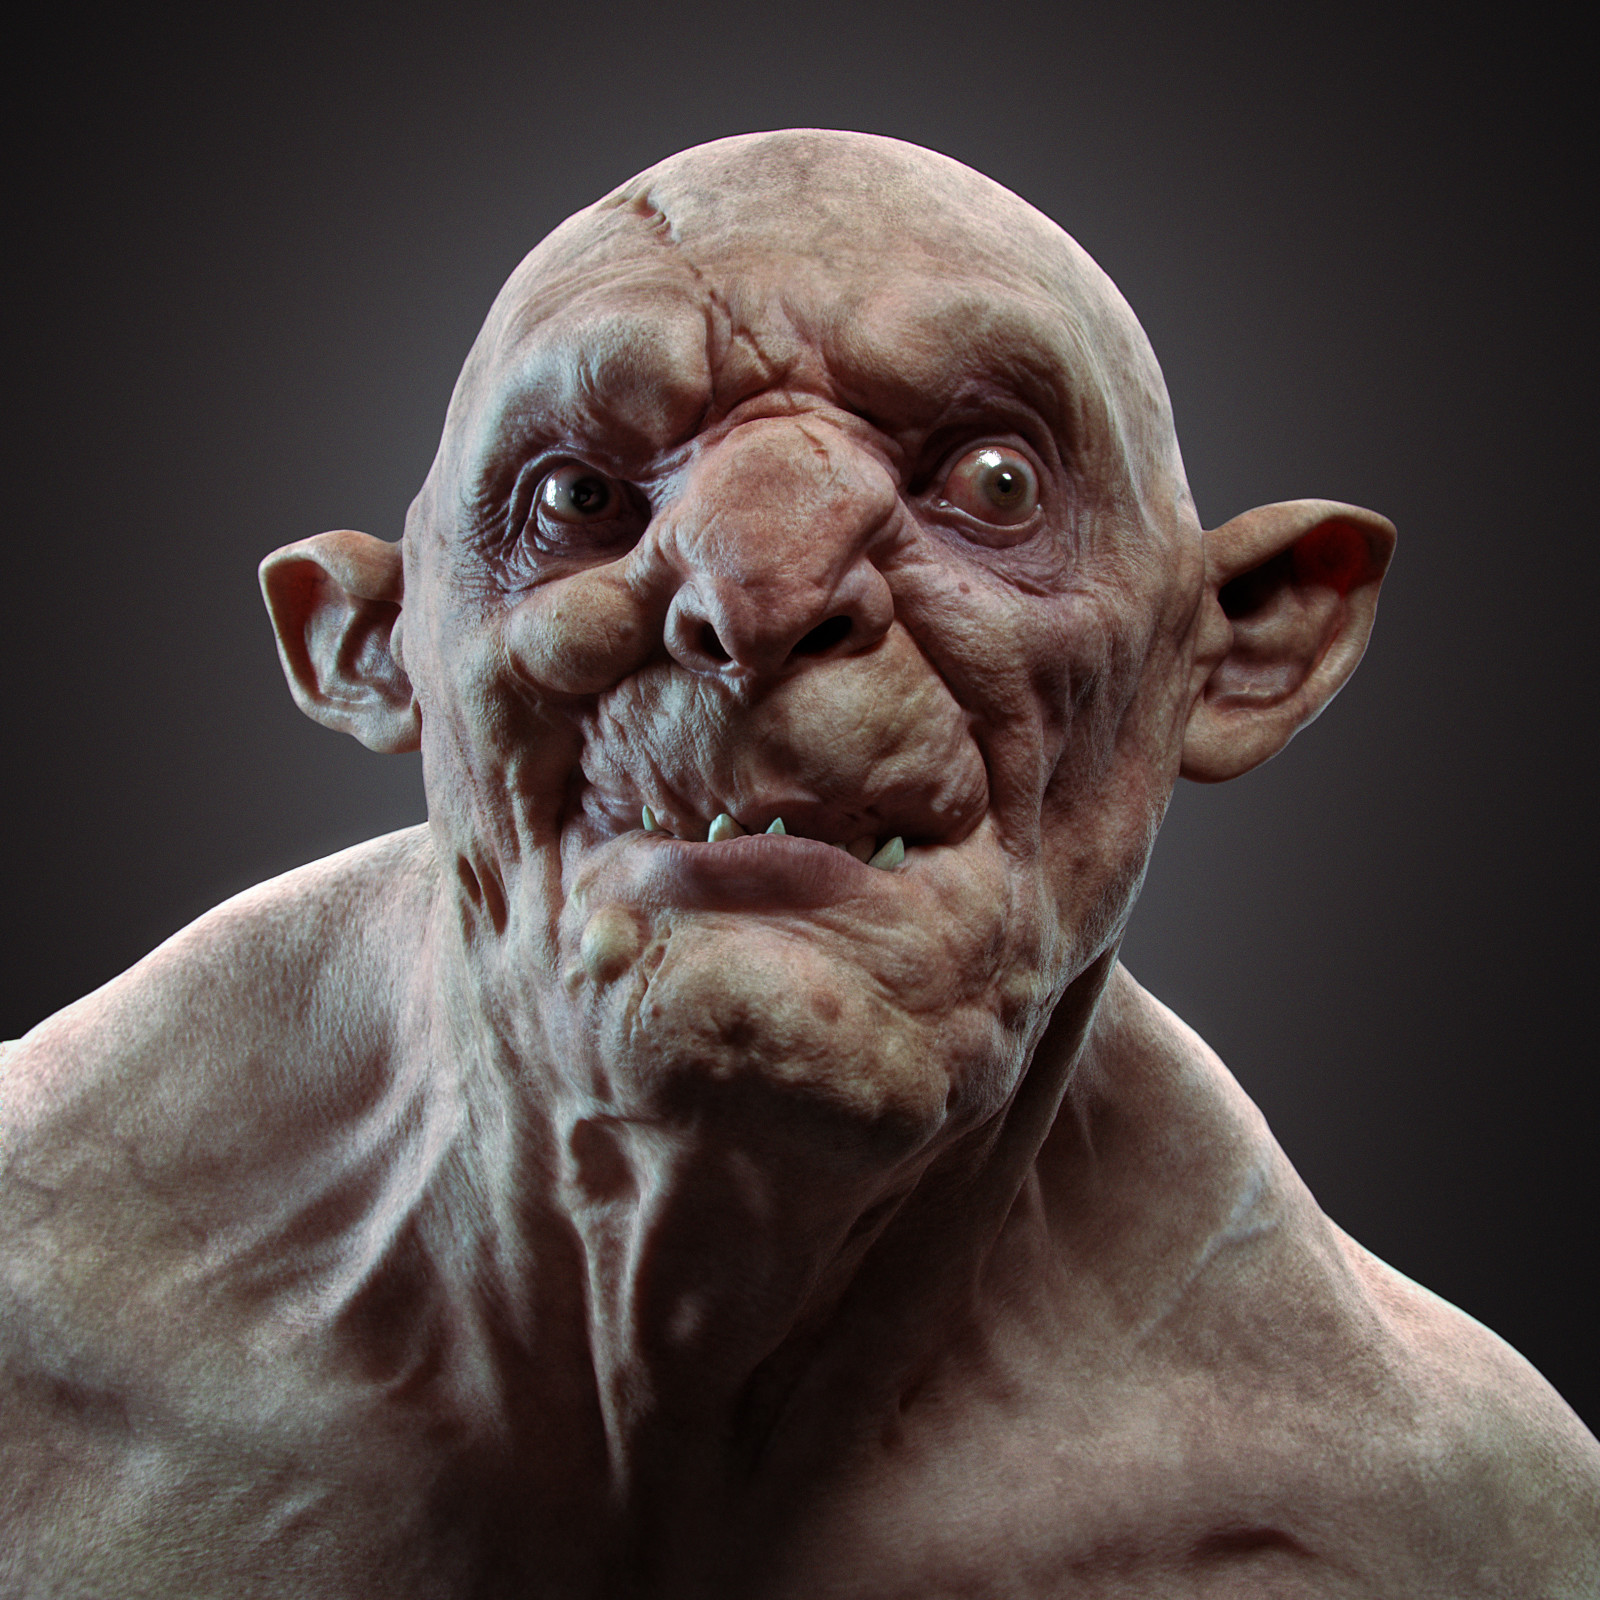 Orc 